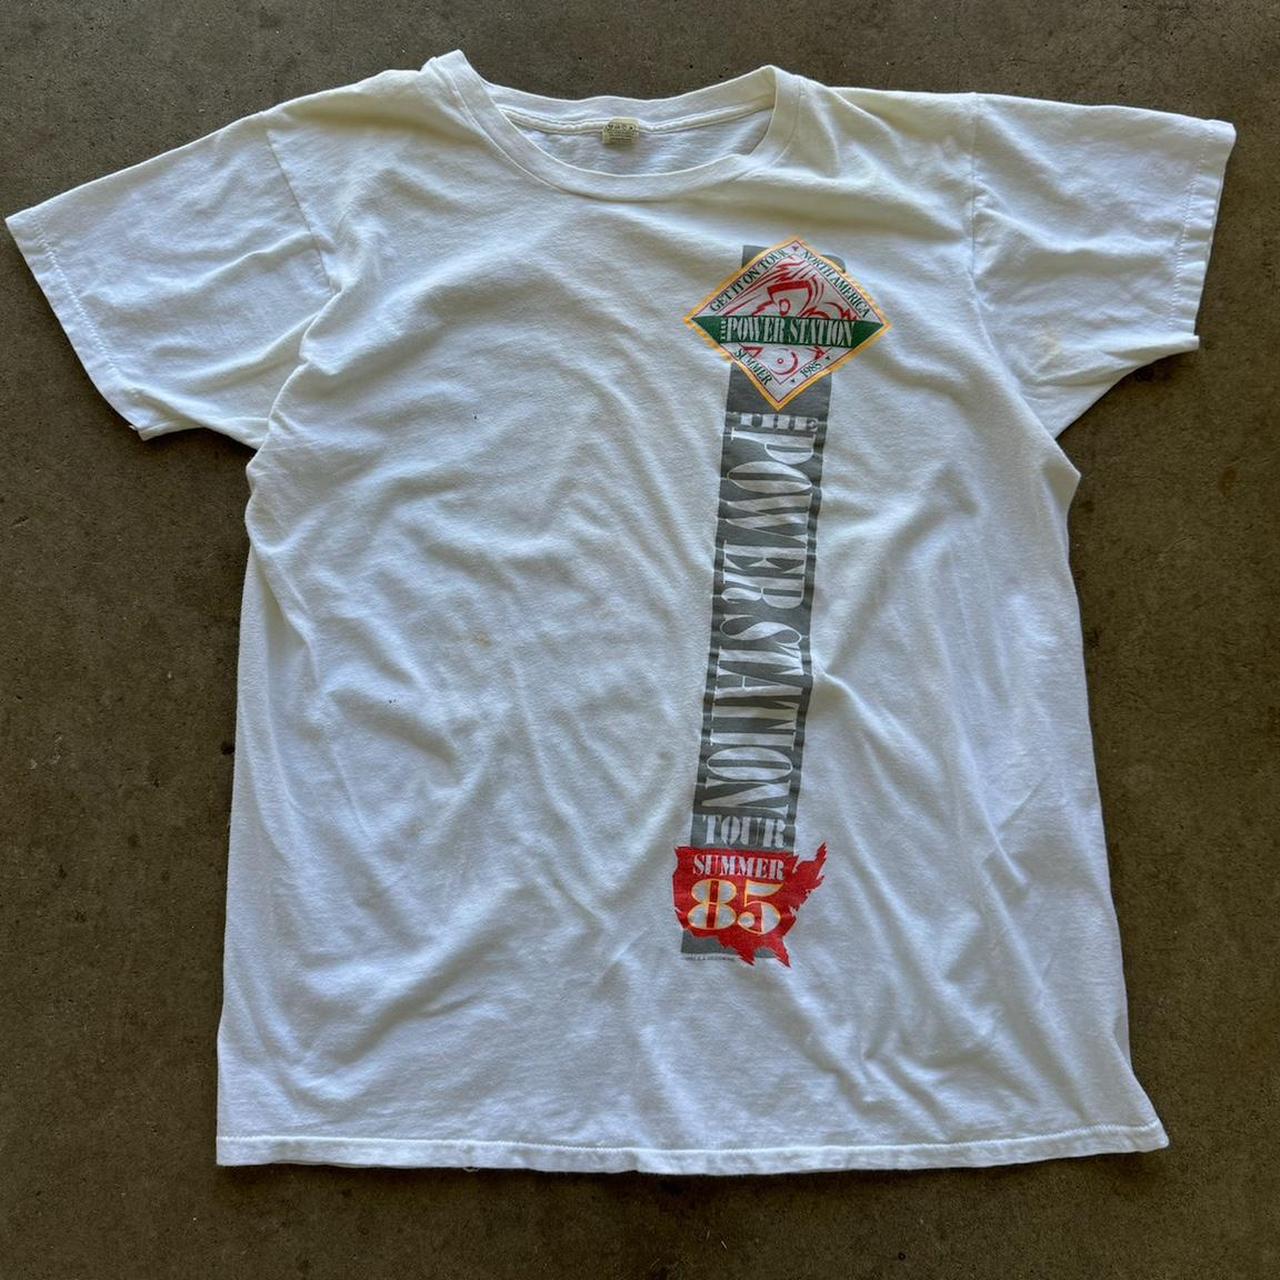 1985 The Power Station Get It On Tour Shirt RARE White T-Shirt